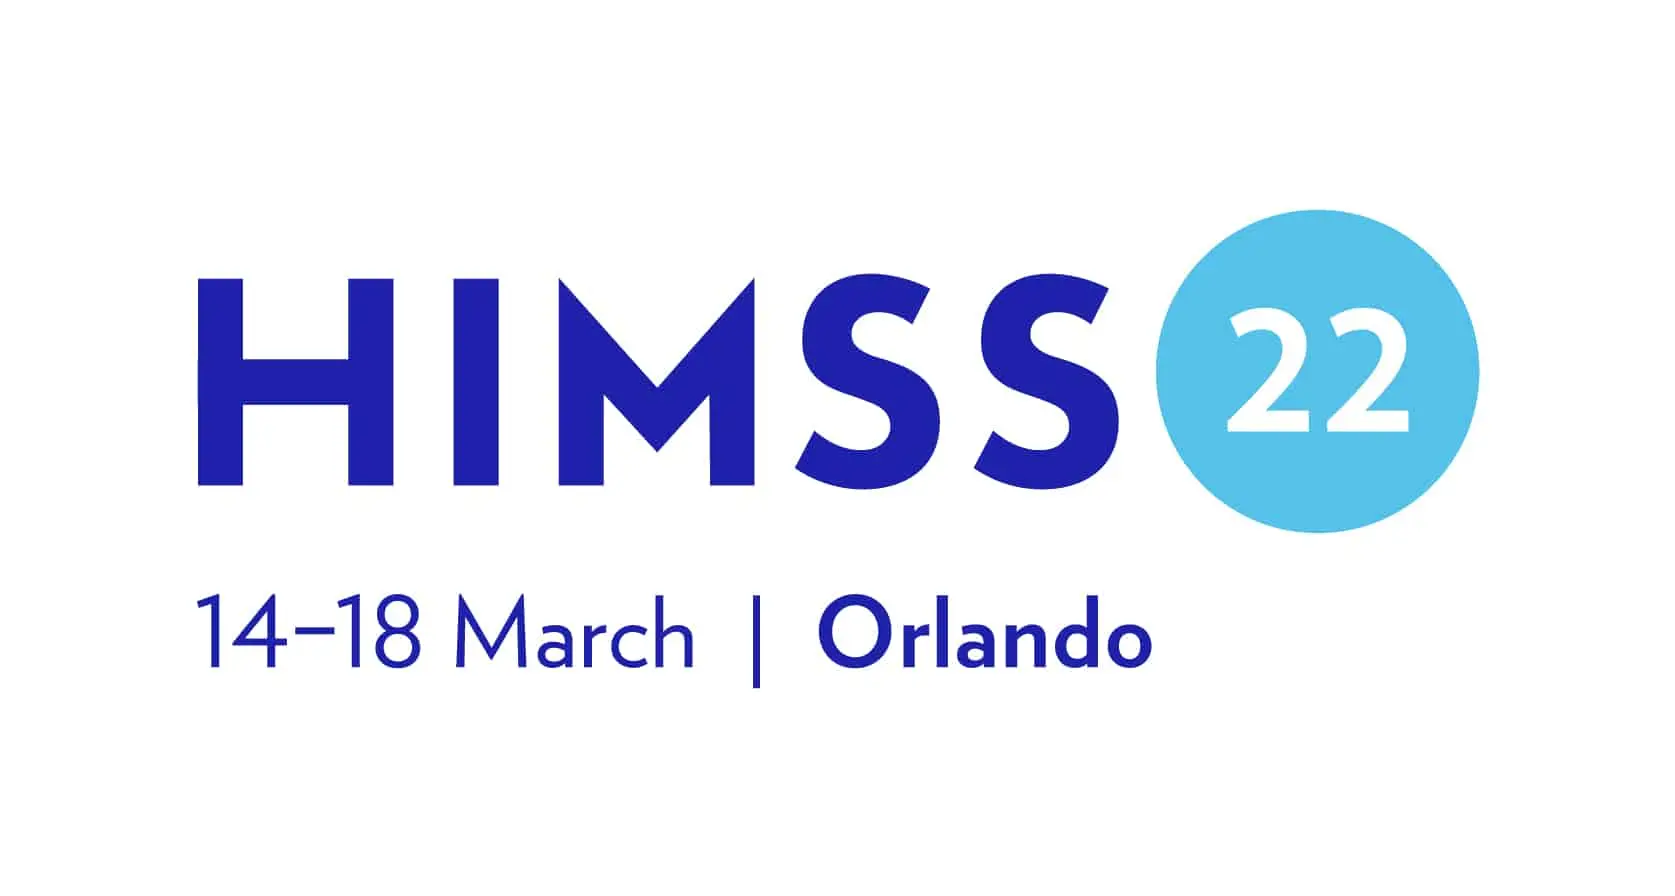 HIMSS 22 Conference Event Image